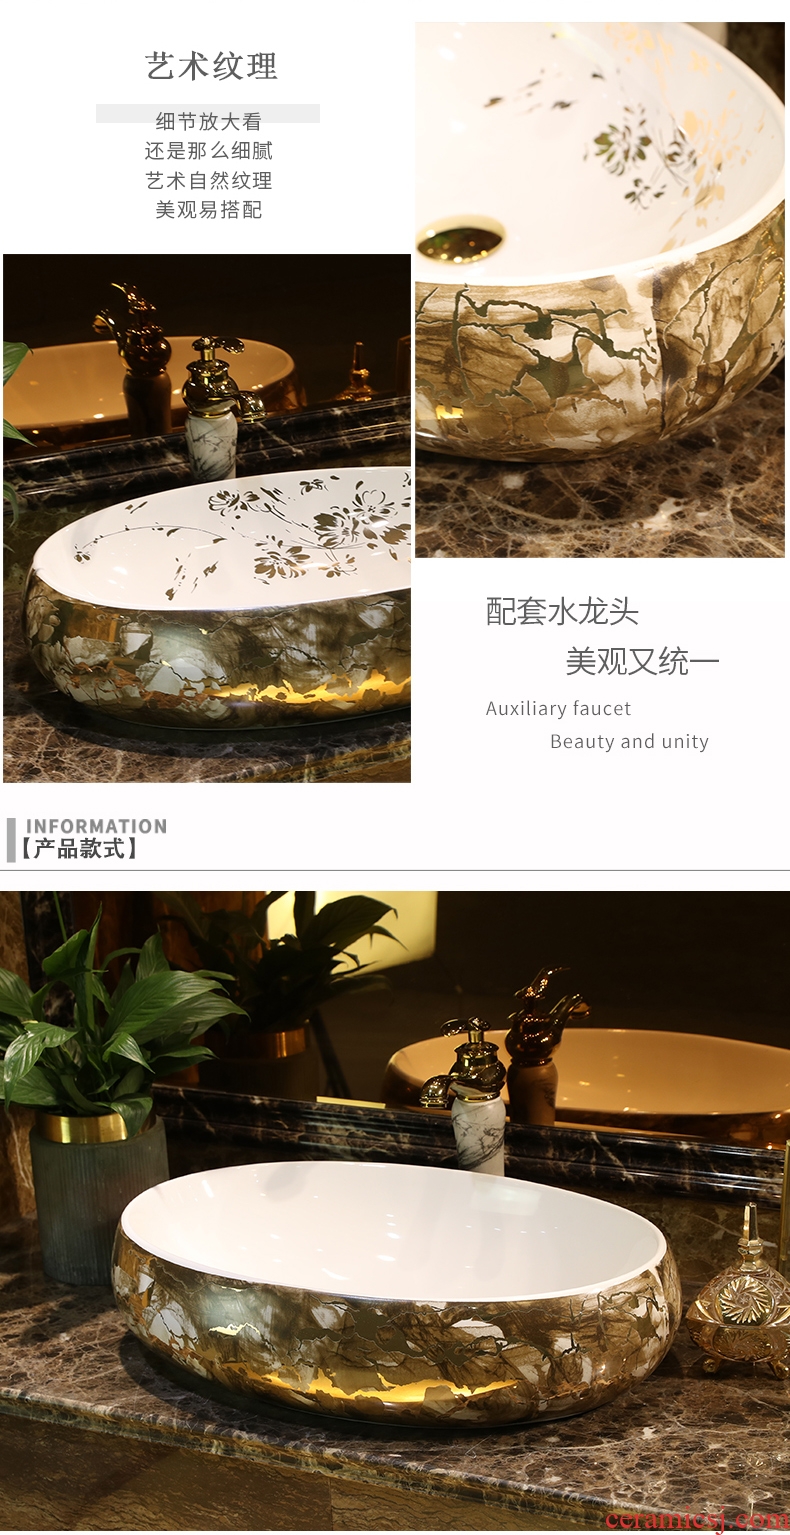 The stage basin ceramic lavabo art household Mosaic gold oval for wash basin toilet stage basin sinks